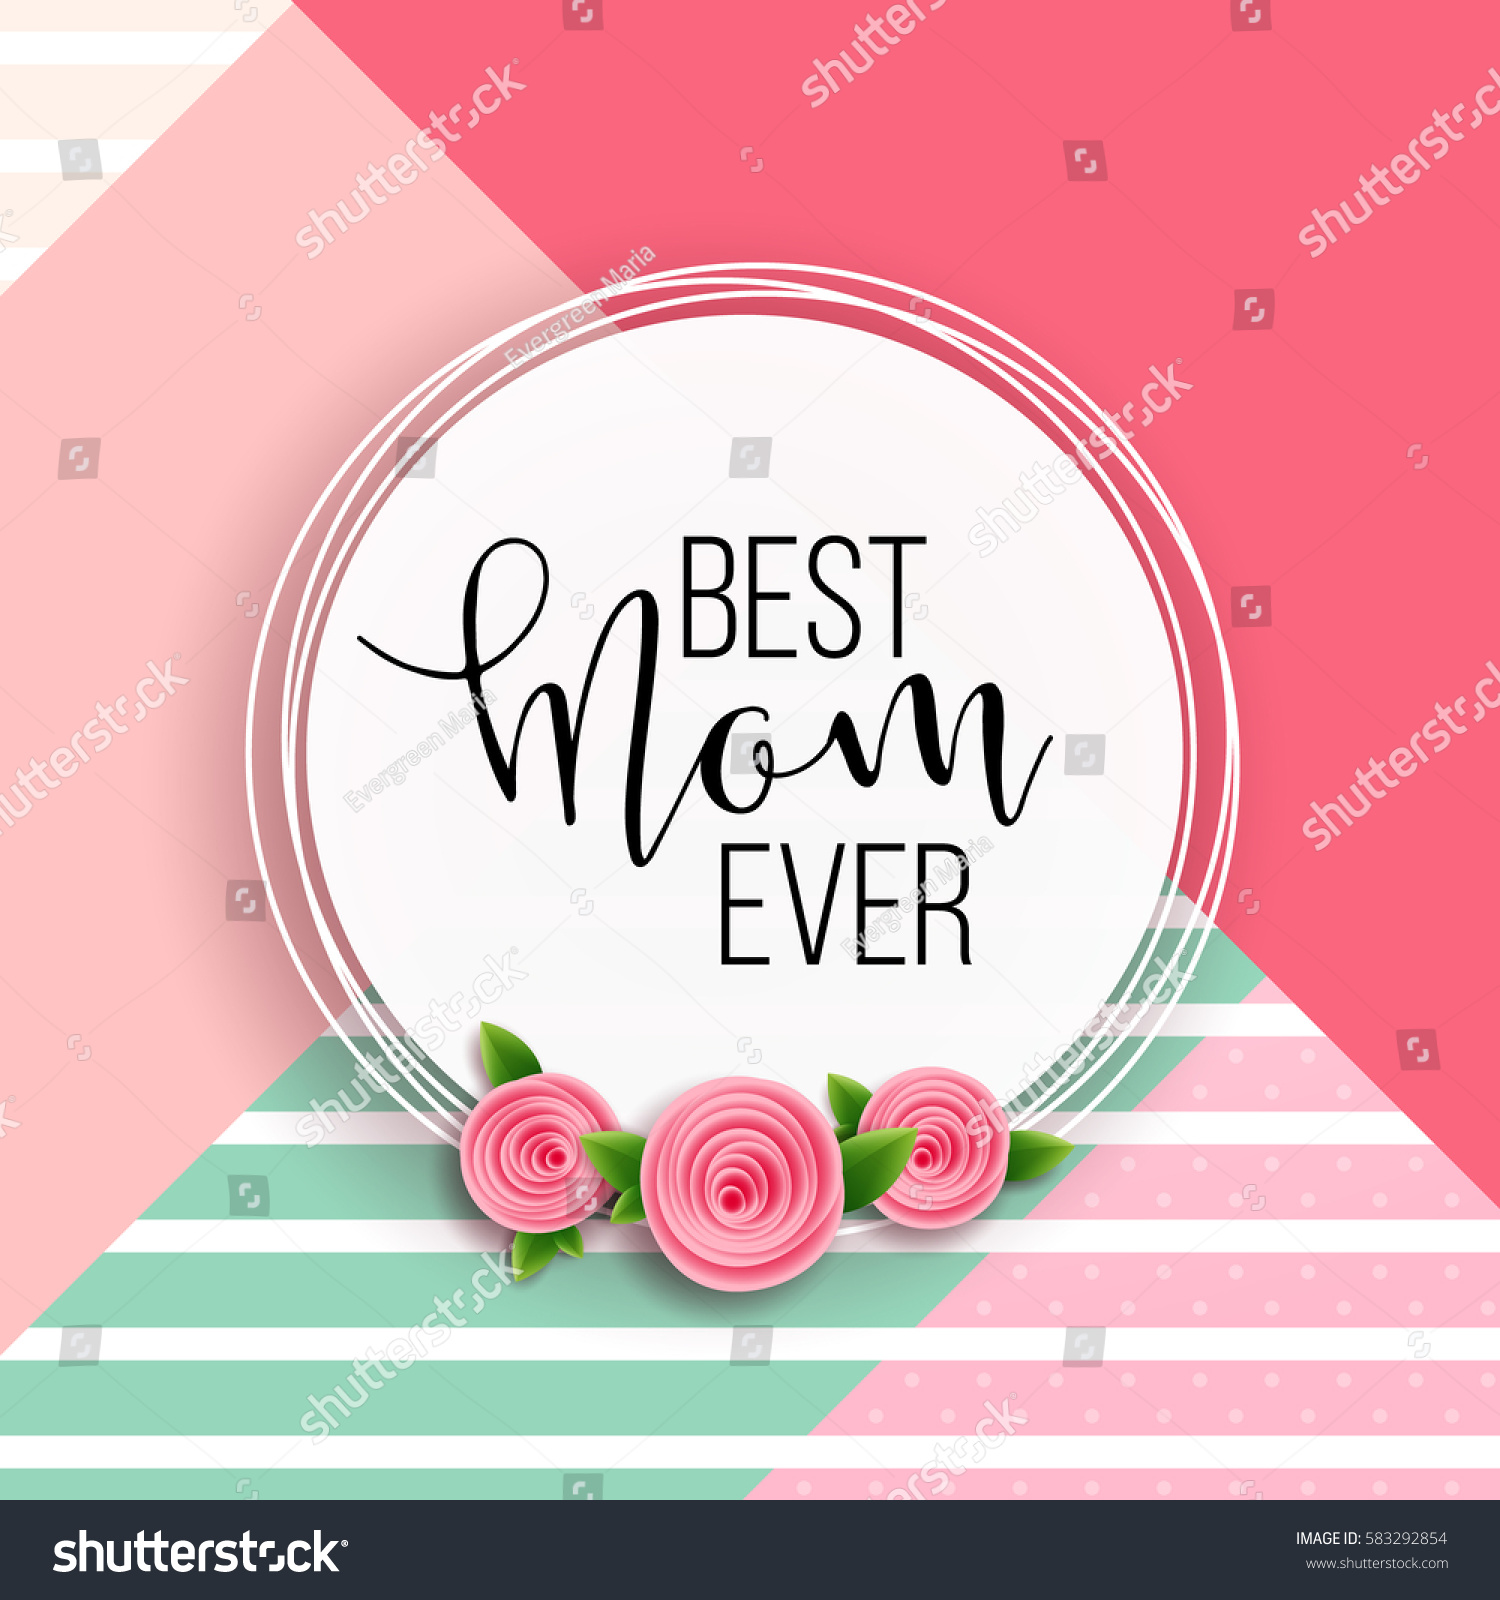 Happy Mothers Day Layout Design Roses Stock Vector (Royalty Free ...